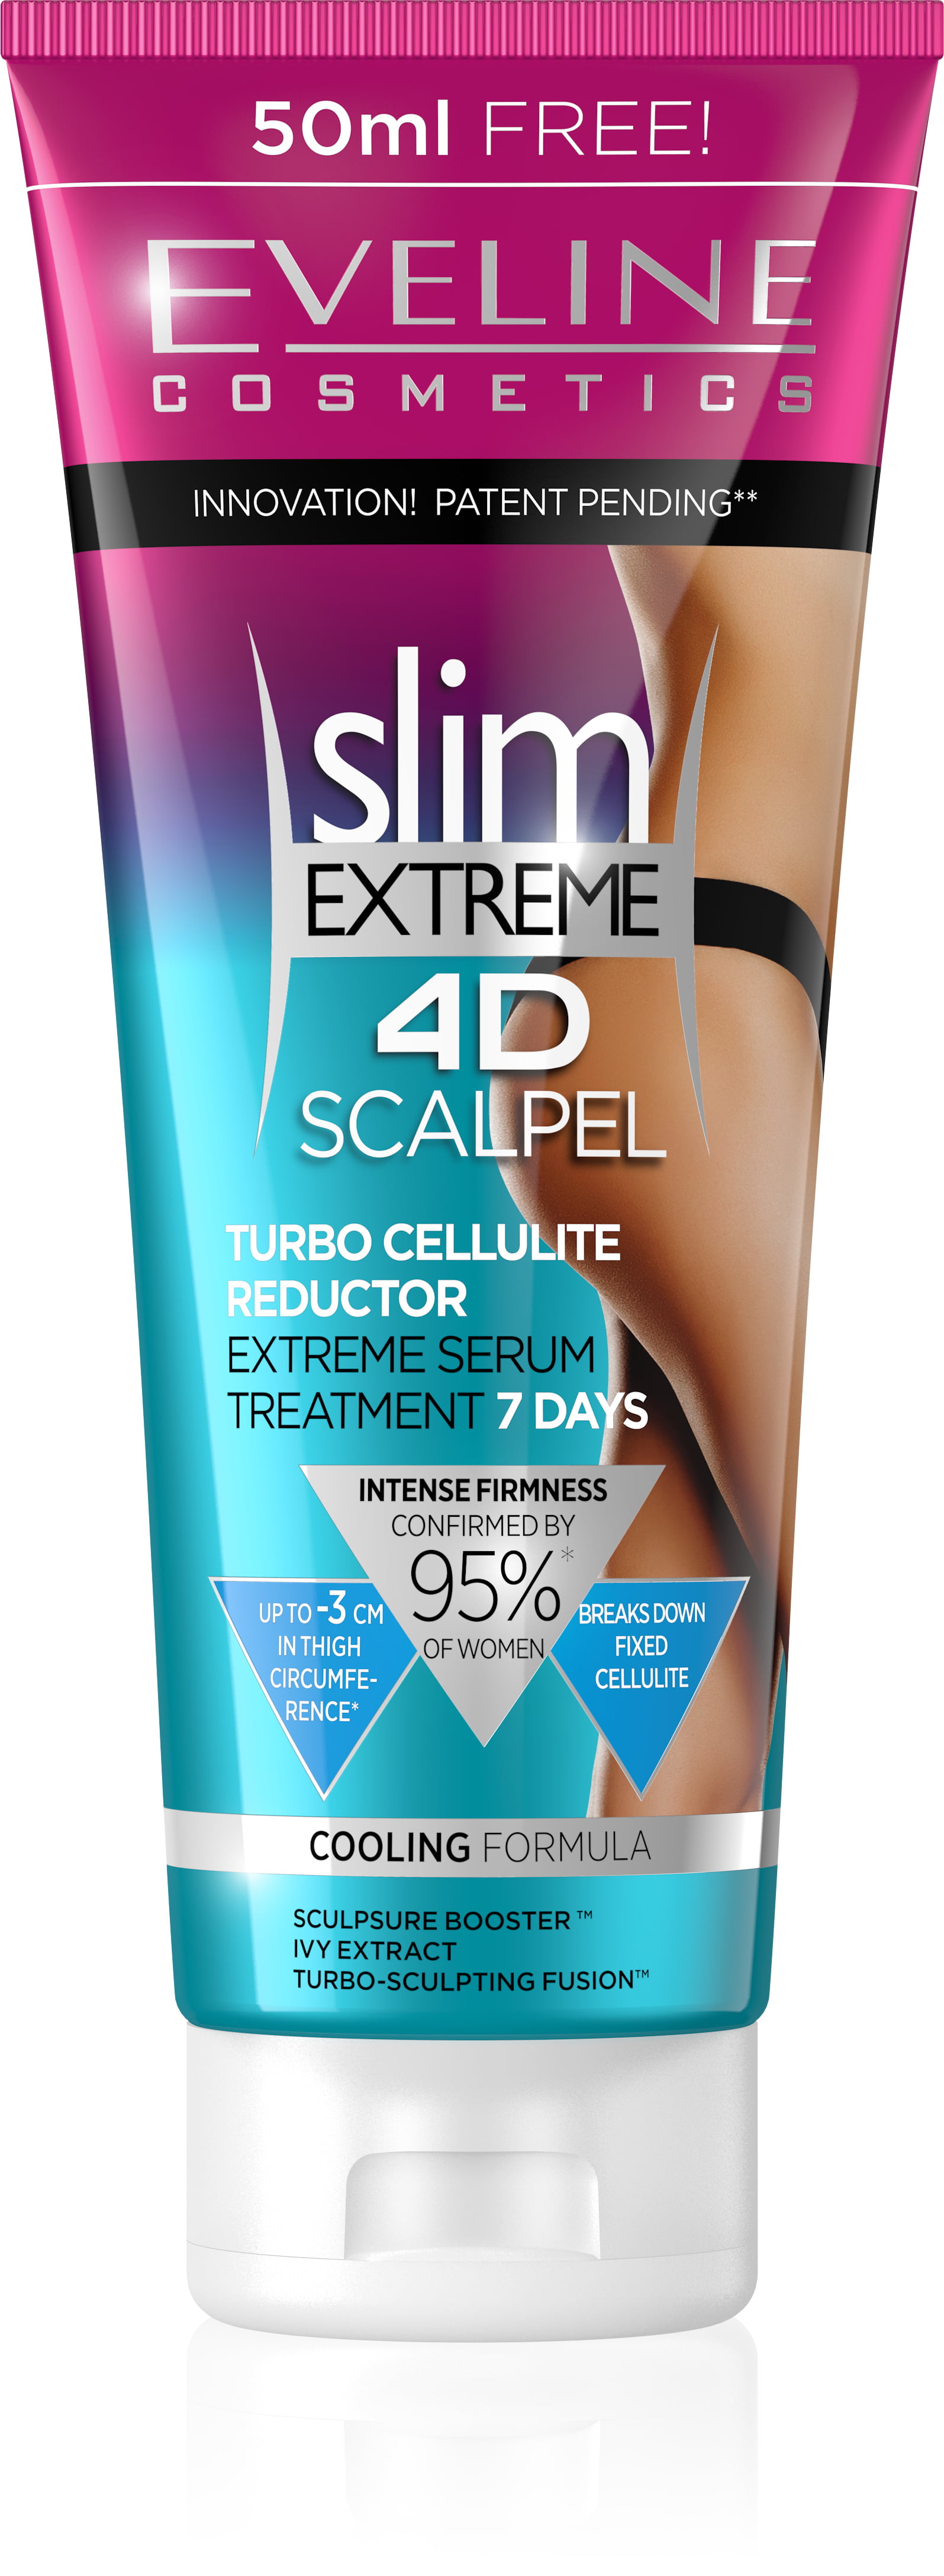 Eveline Cosmetics Slim Extreme 4d Scalpel Turbo Cellulite Reductor Cream With Cooling Formula